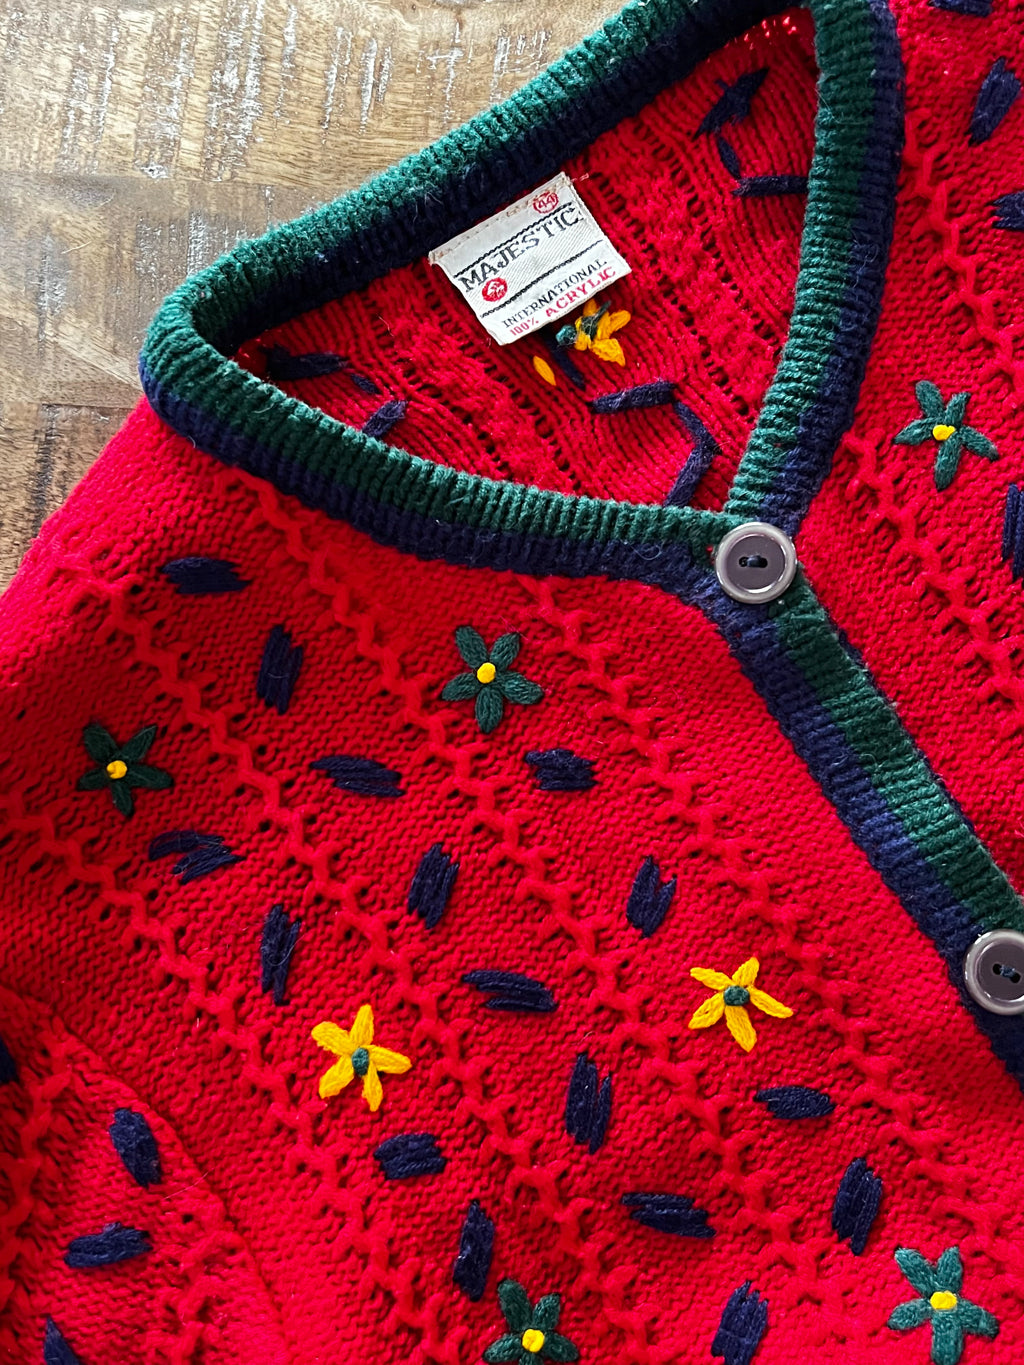 Vintage 1970s 1980s German/Austrian Sweater - Zesty Red Embroidered Dirndl Folkloric Austrian Tyrolean Cardigan Size XS S